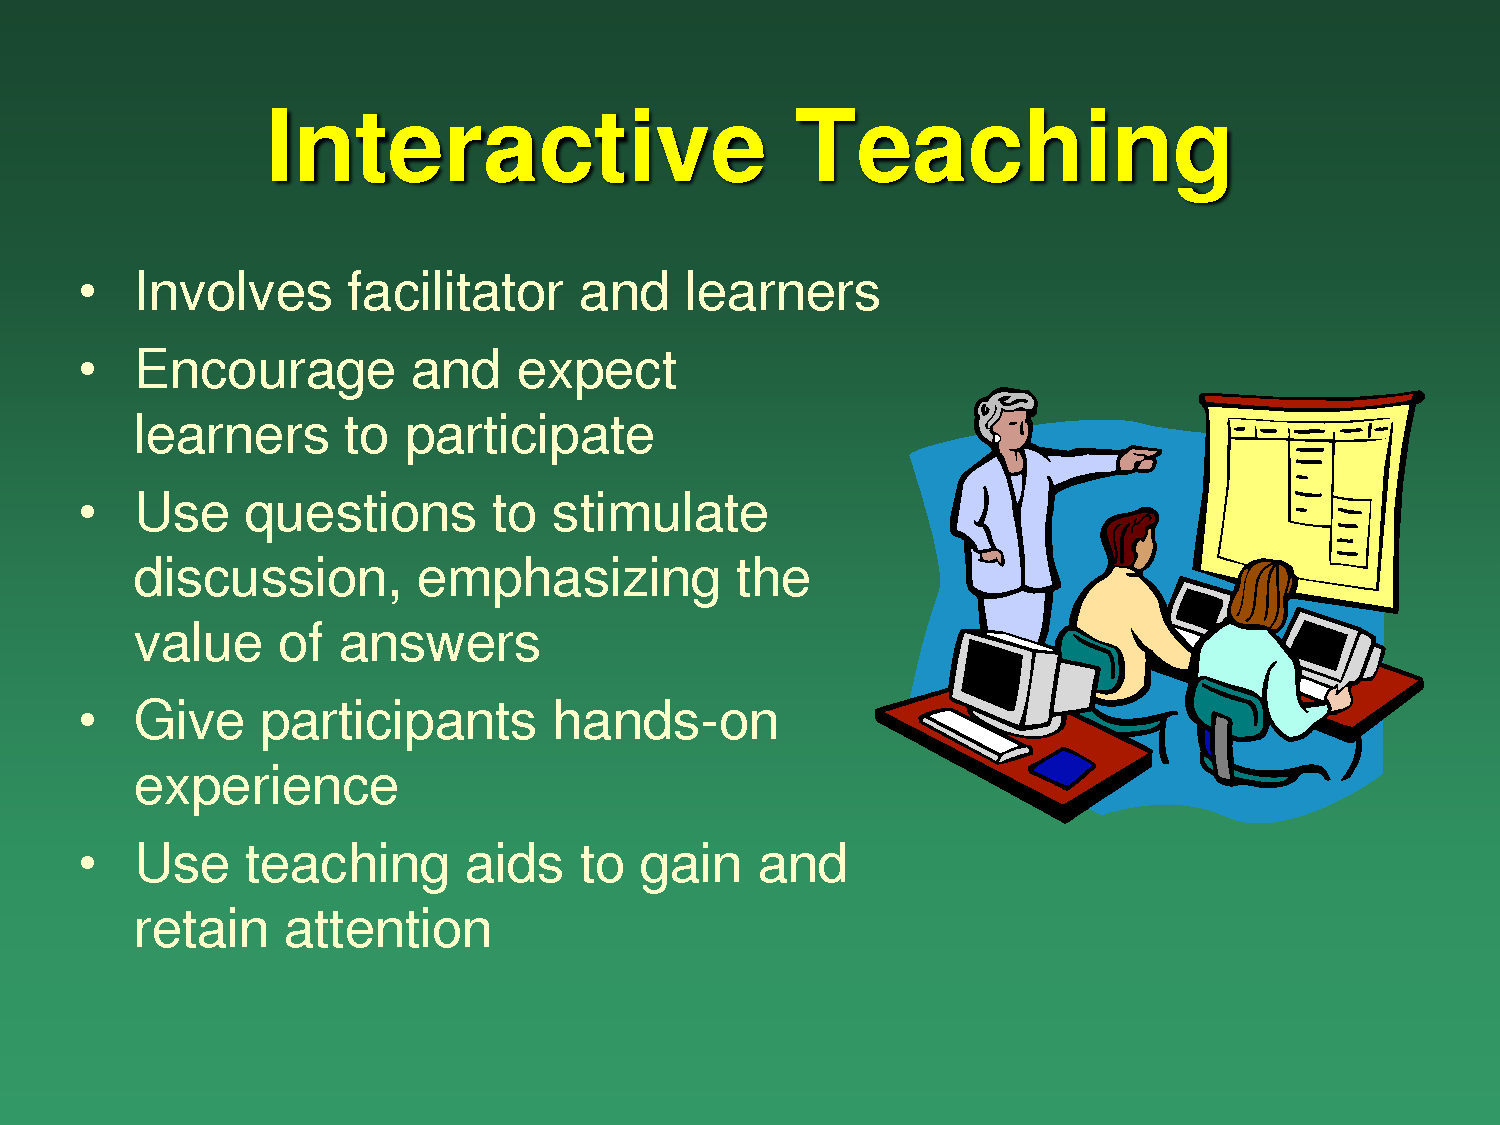 How do you use interactive teaching?